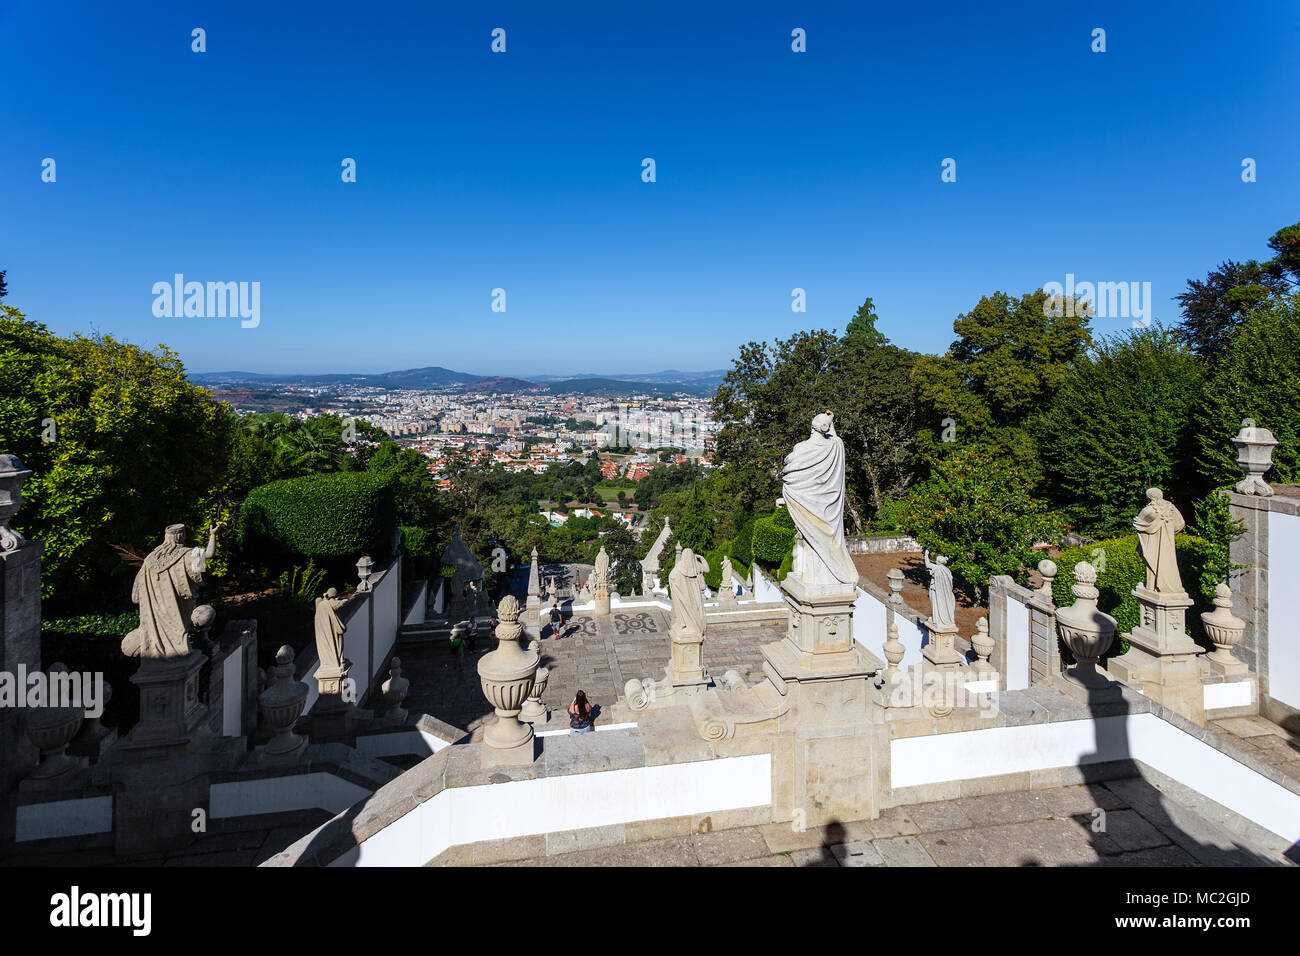 Braga, Portugal. The city of Braga seen from the top of the staircase of the Bom Jesus do Monte Sanctuary. Baroque architecture. Stock Photo